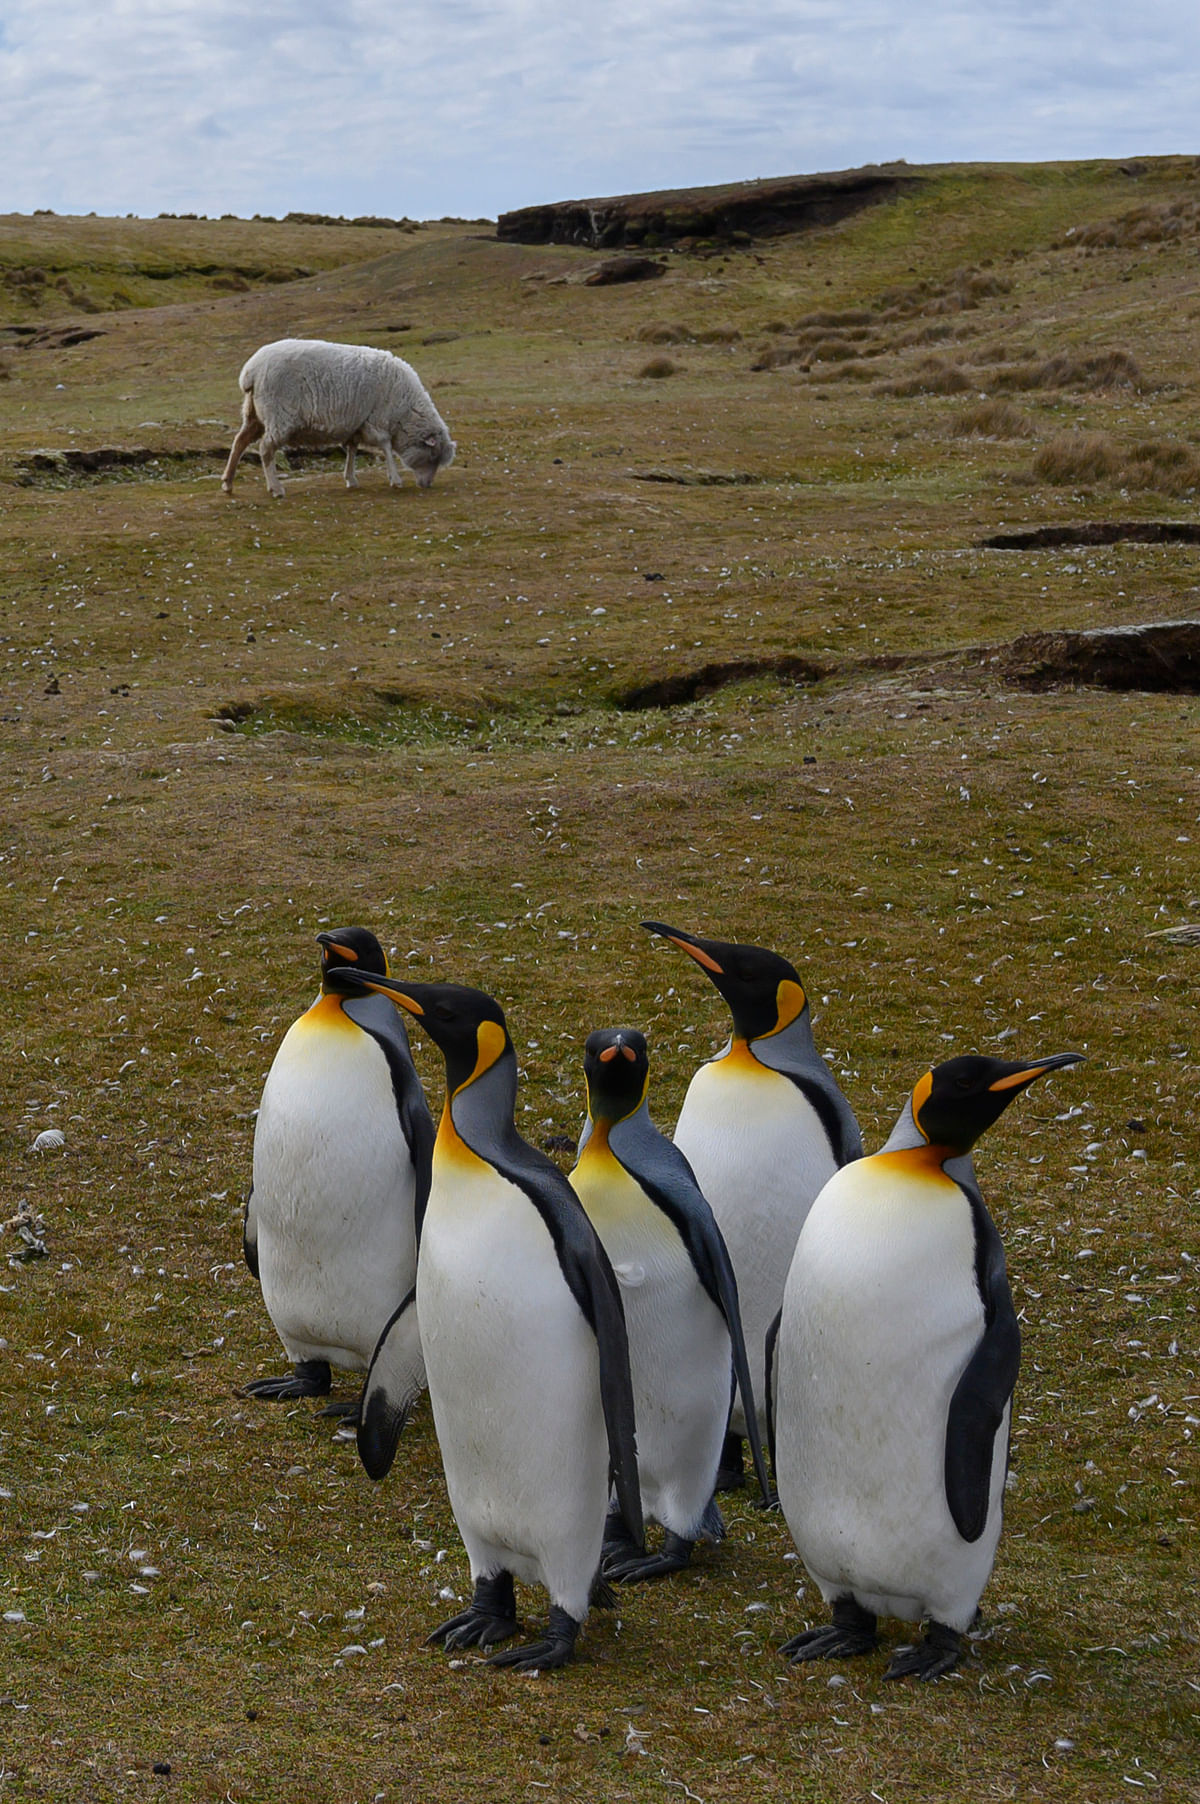 King penguins and a sheep are seen at Volunteer Point, north of Stanley in the Falkland Islands (Malvinas), a British Overseas Territory in the South Atlantic Ocean, on 6 October 2019. Photo: AFP